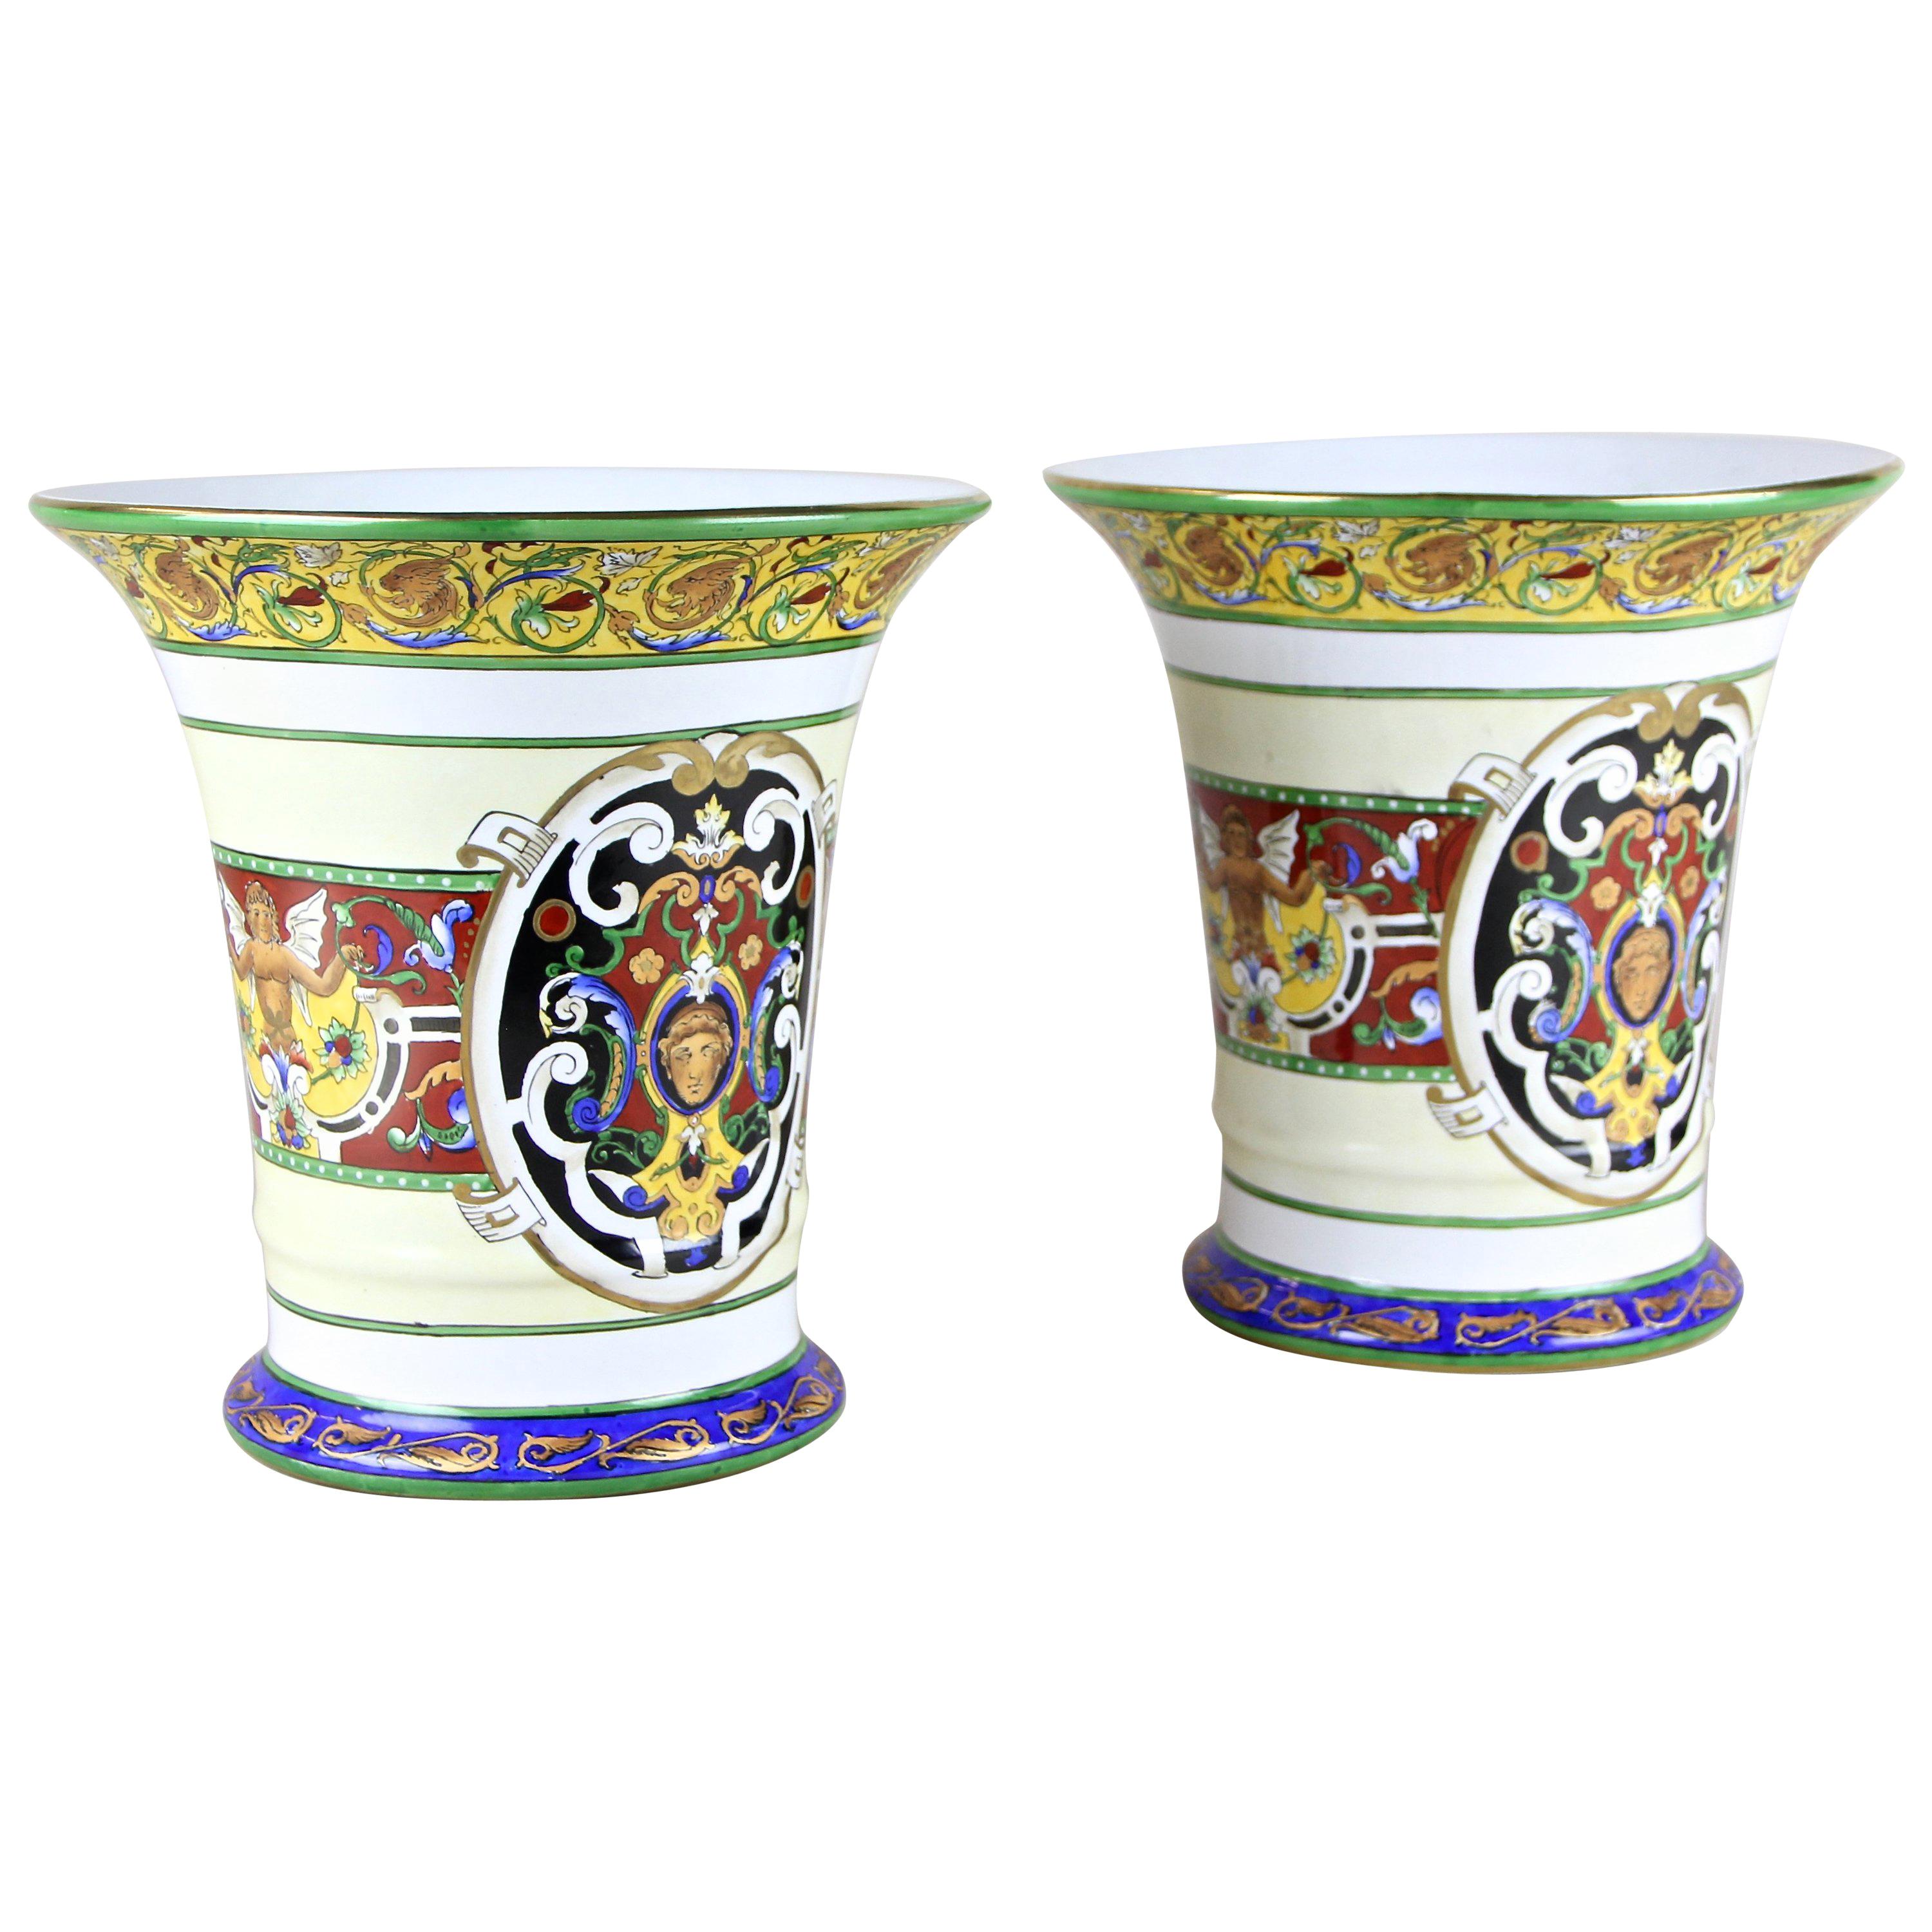 Pair of Hand Painted Porcelain Vases, Italy, circa 1900